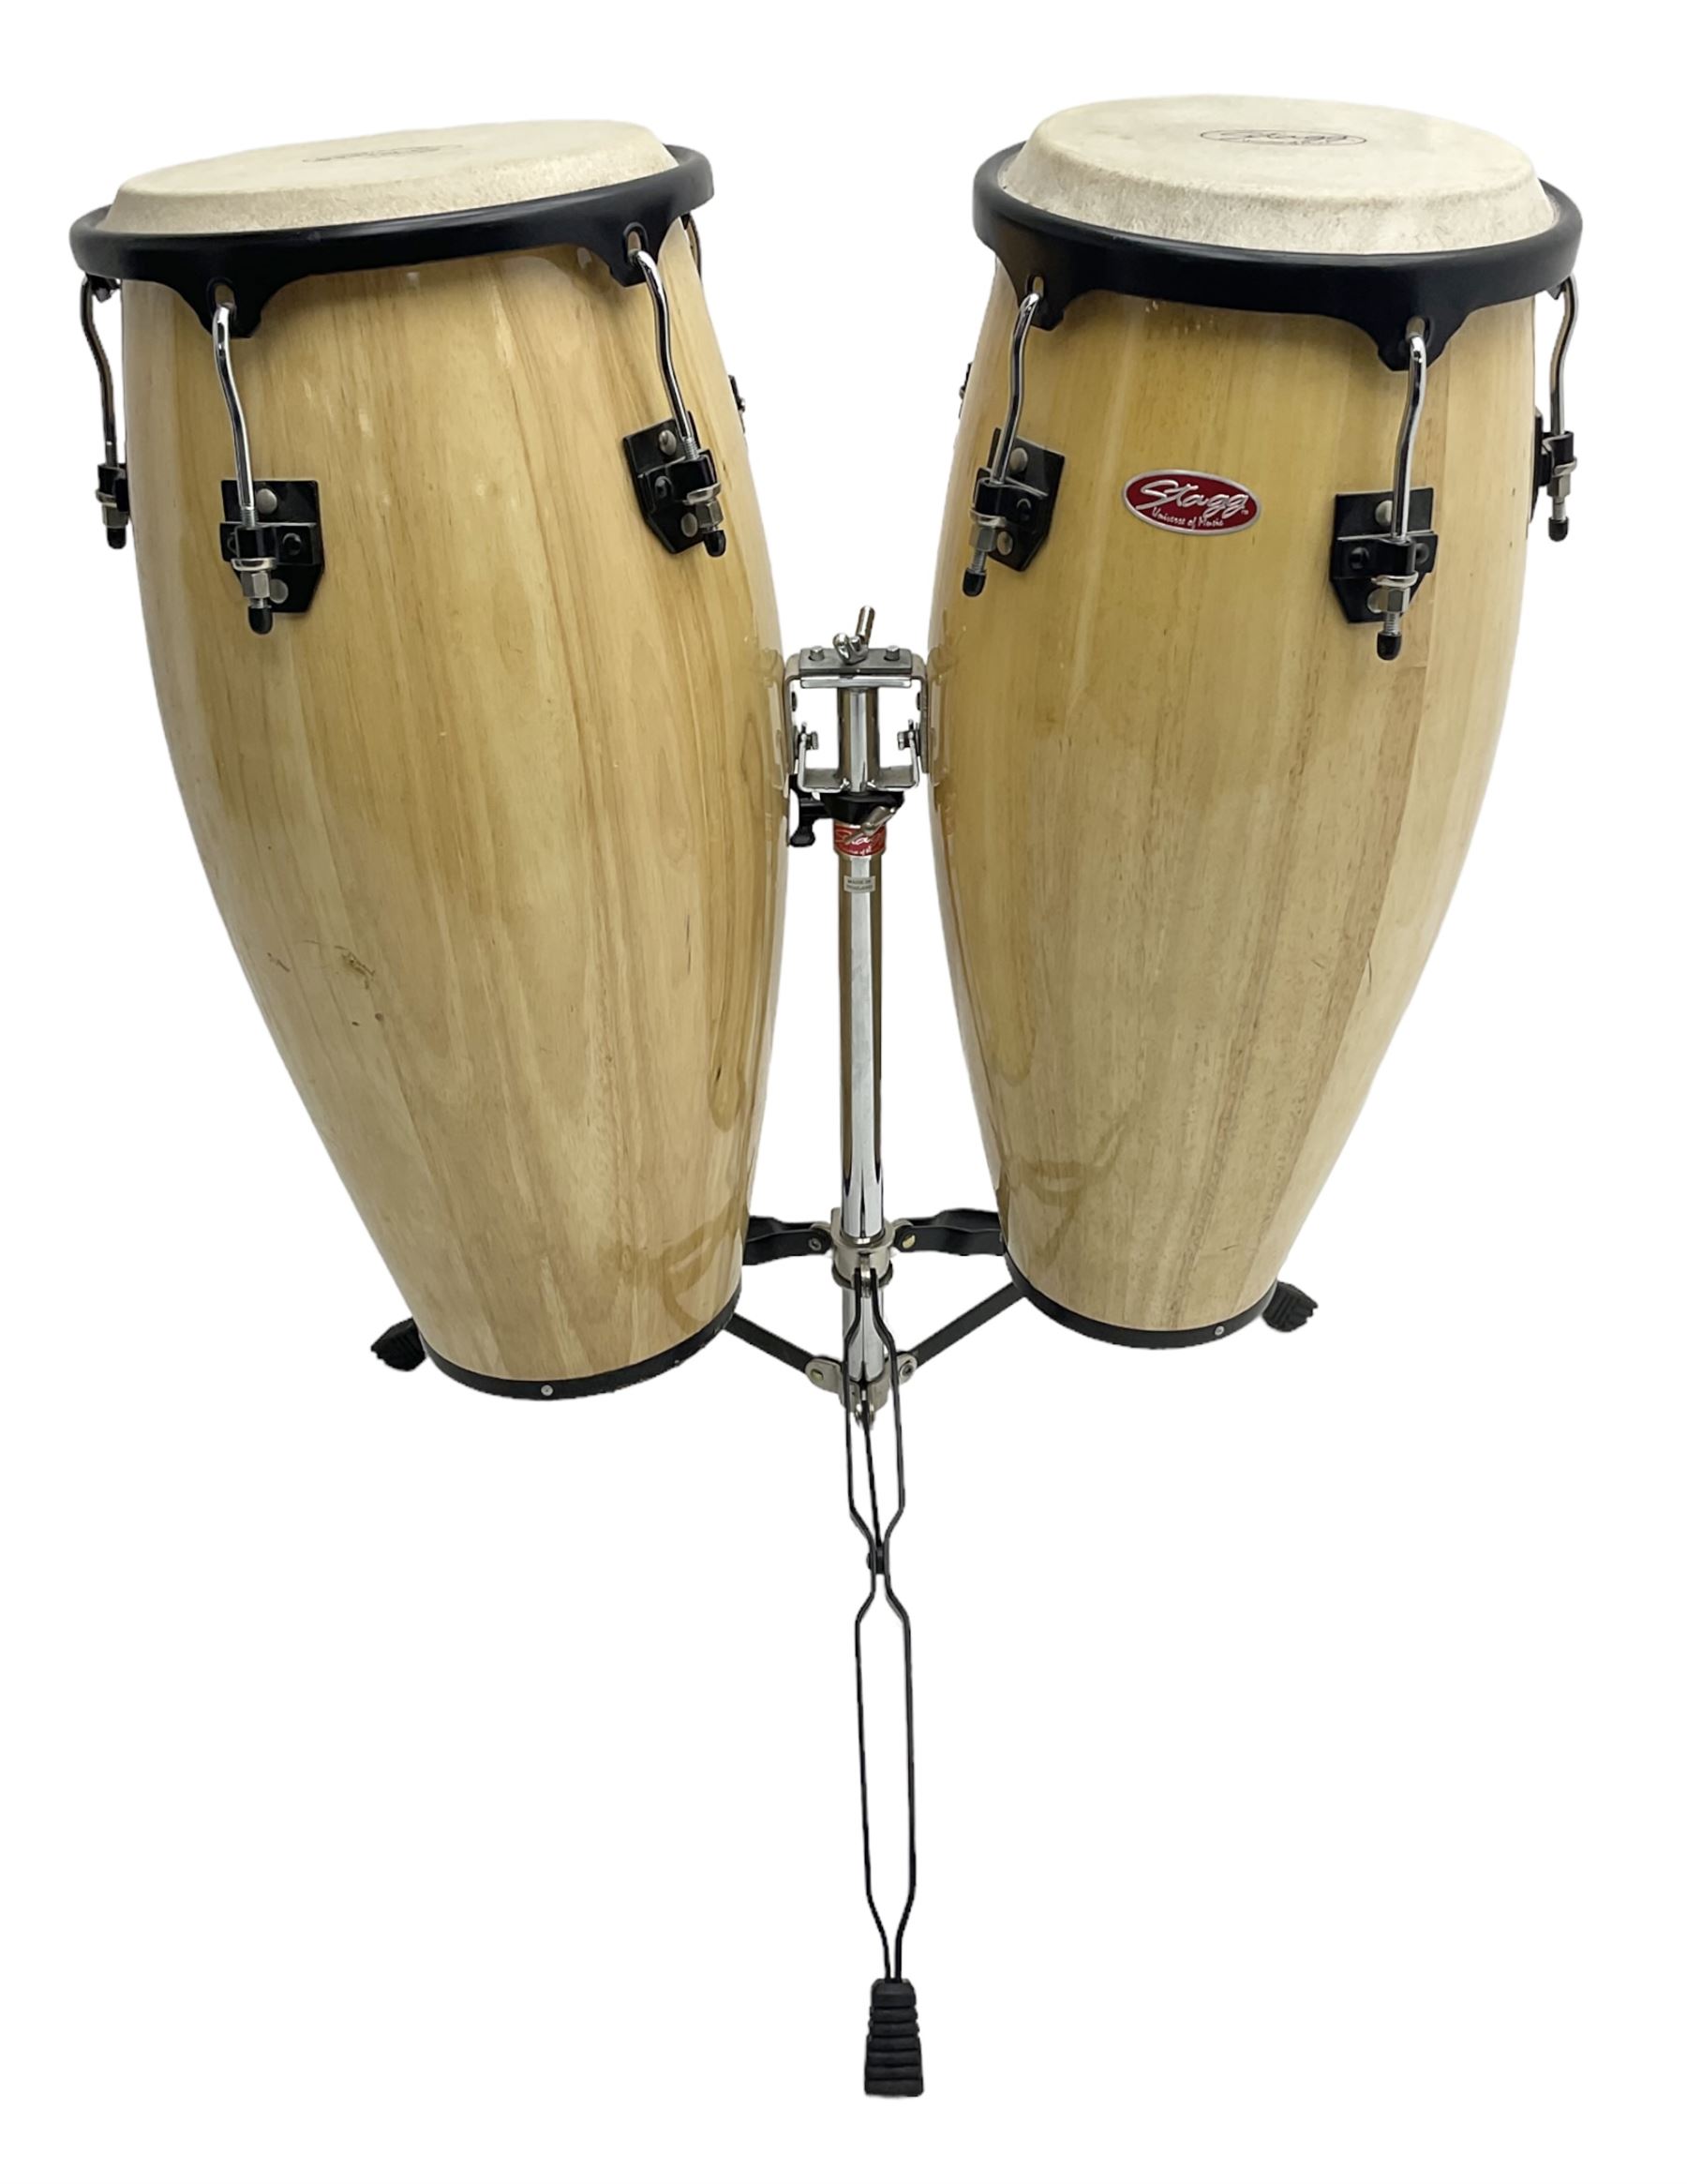 Pair of Stagg conga drums